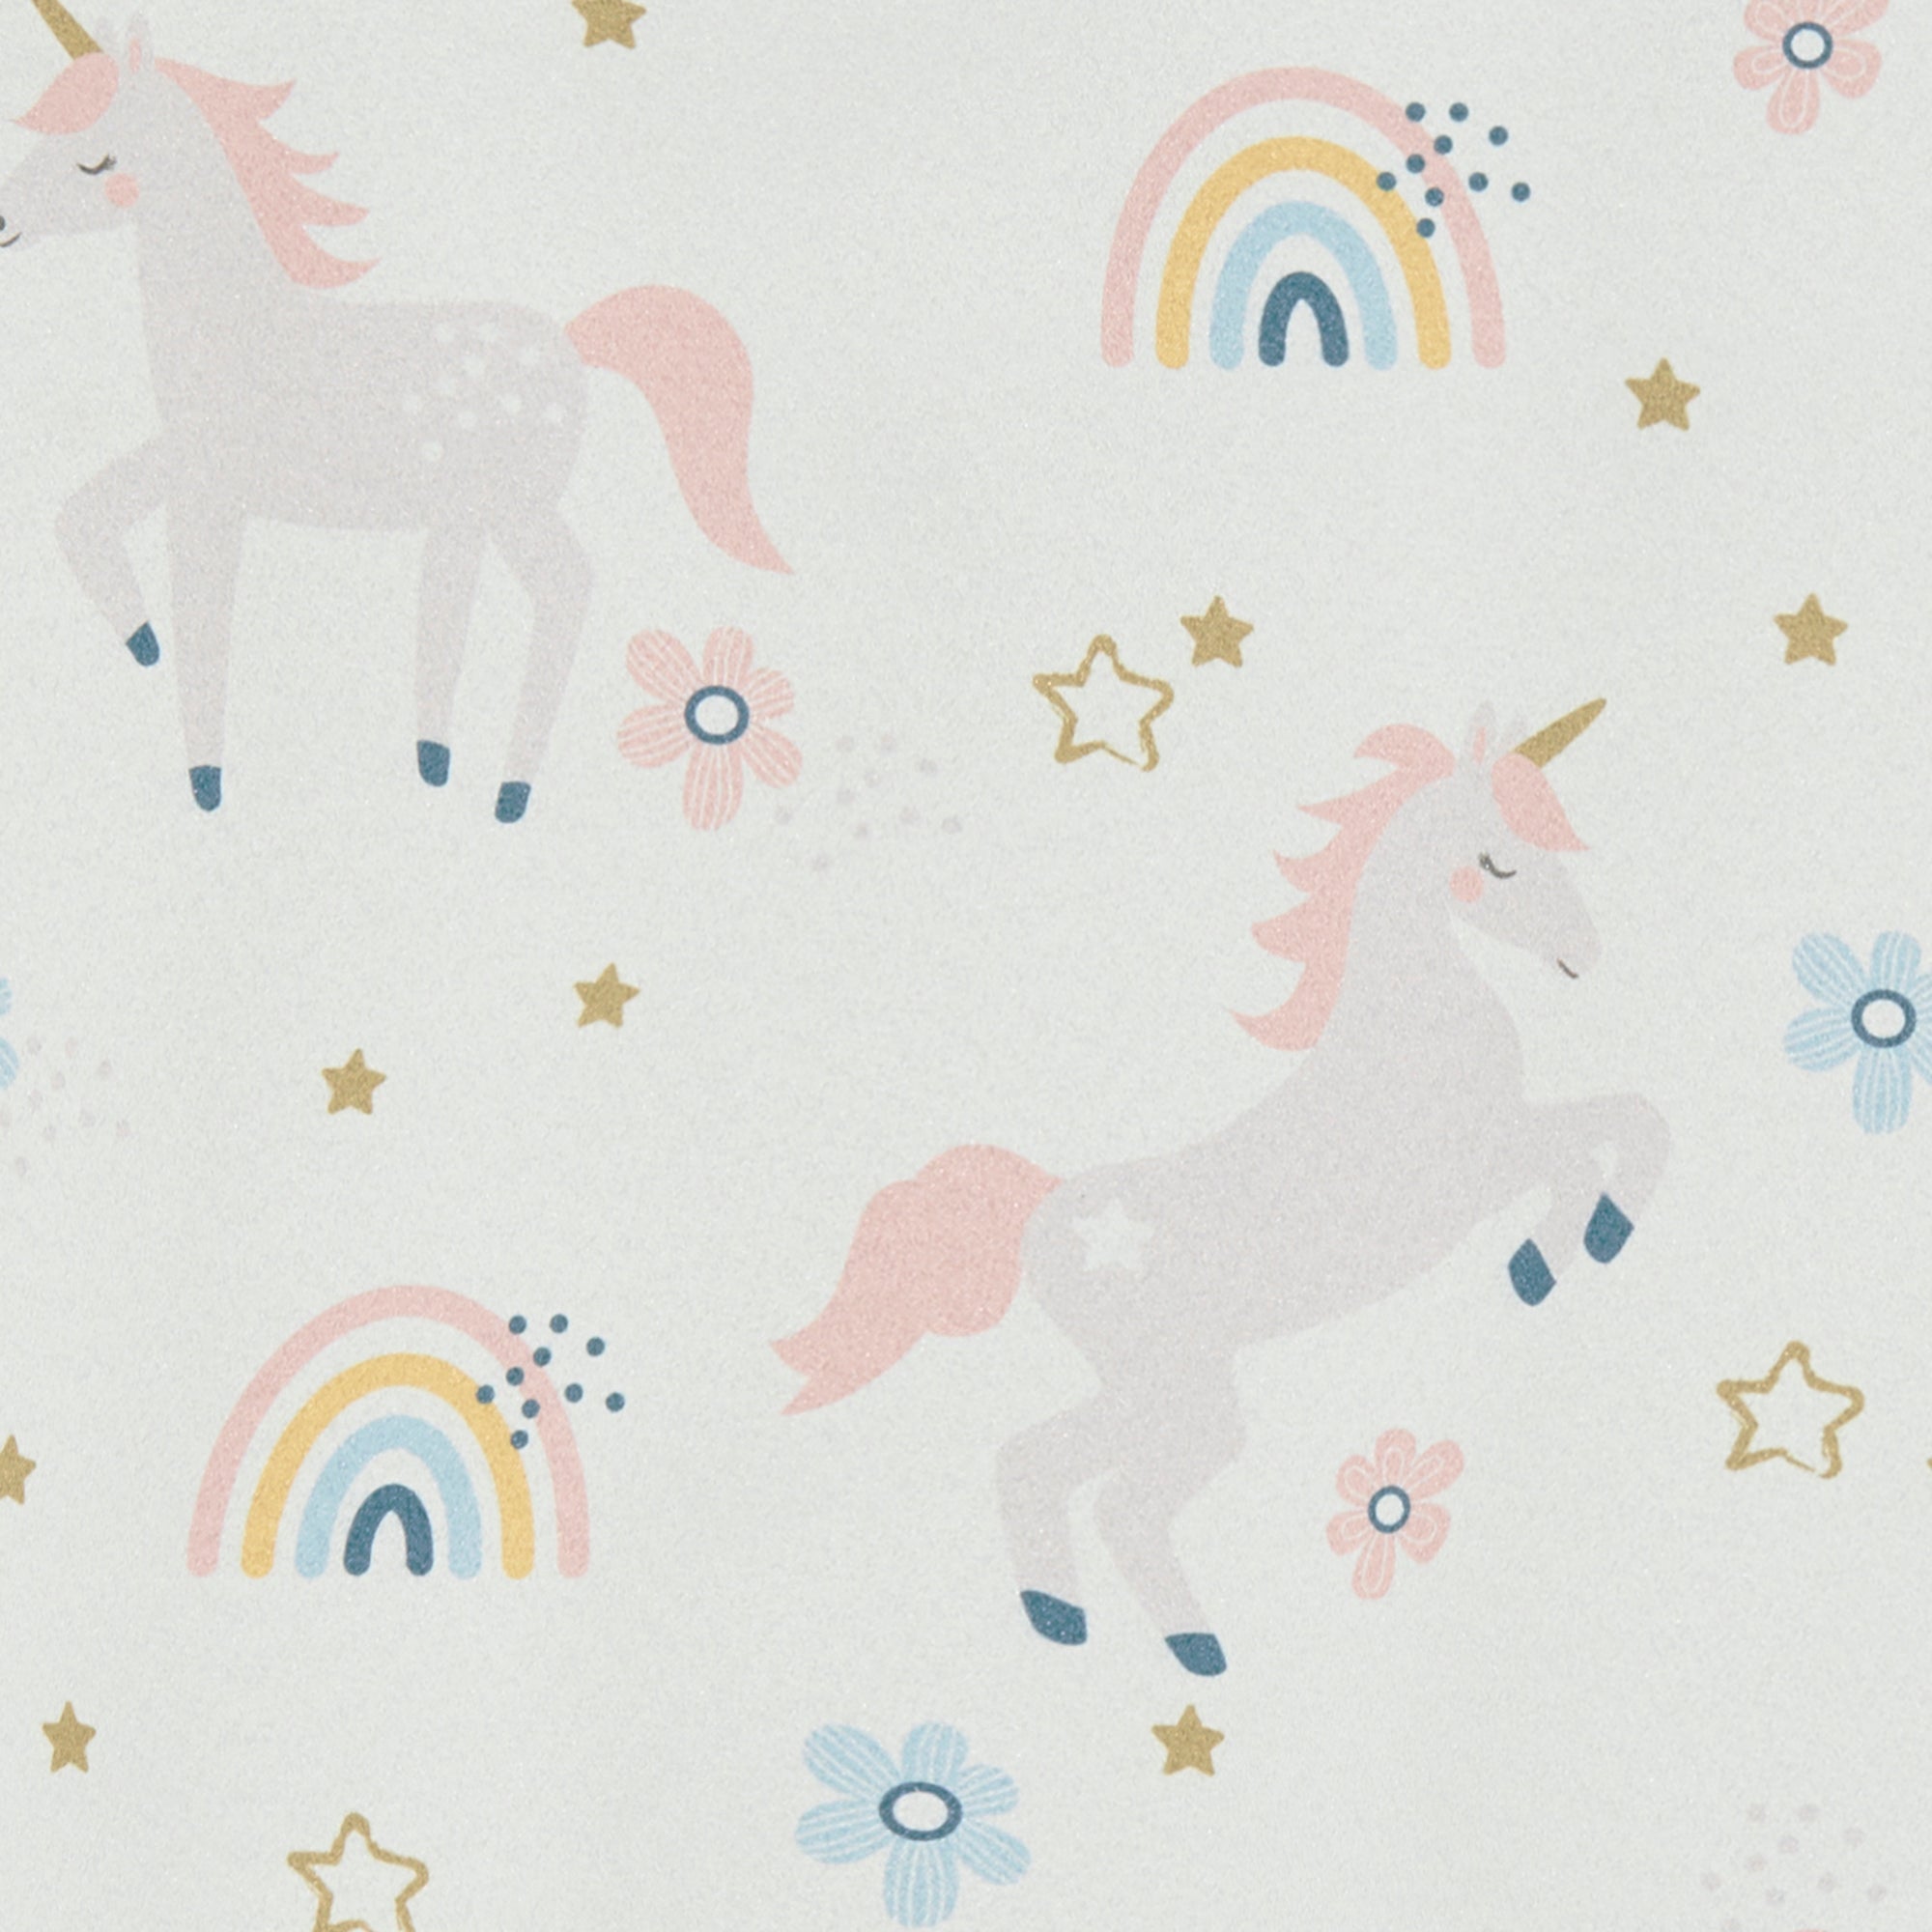 Unicorn Blackout Made to Measure Roller Blind Fabric Sample